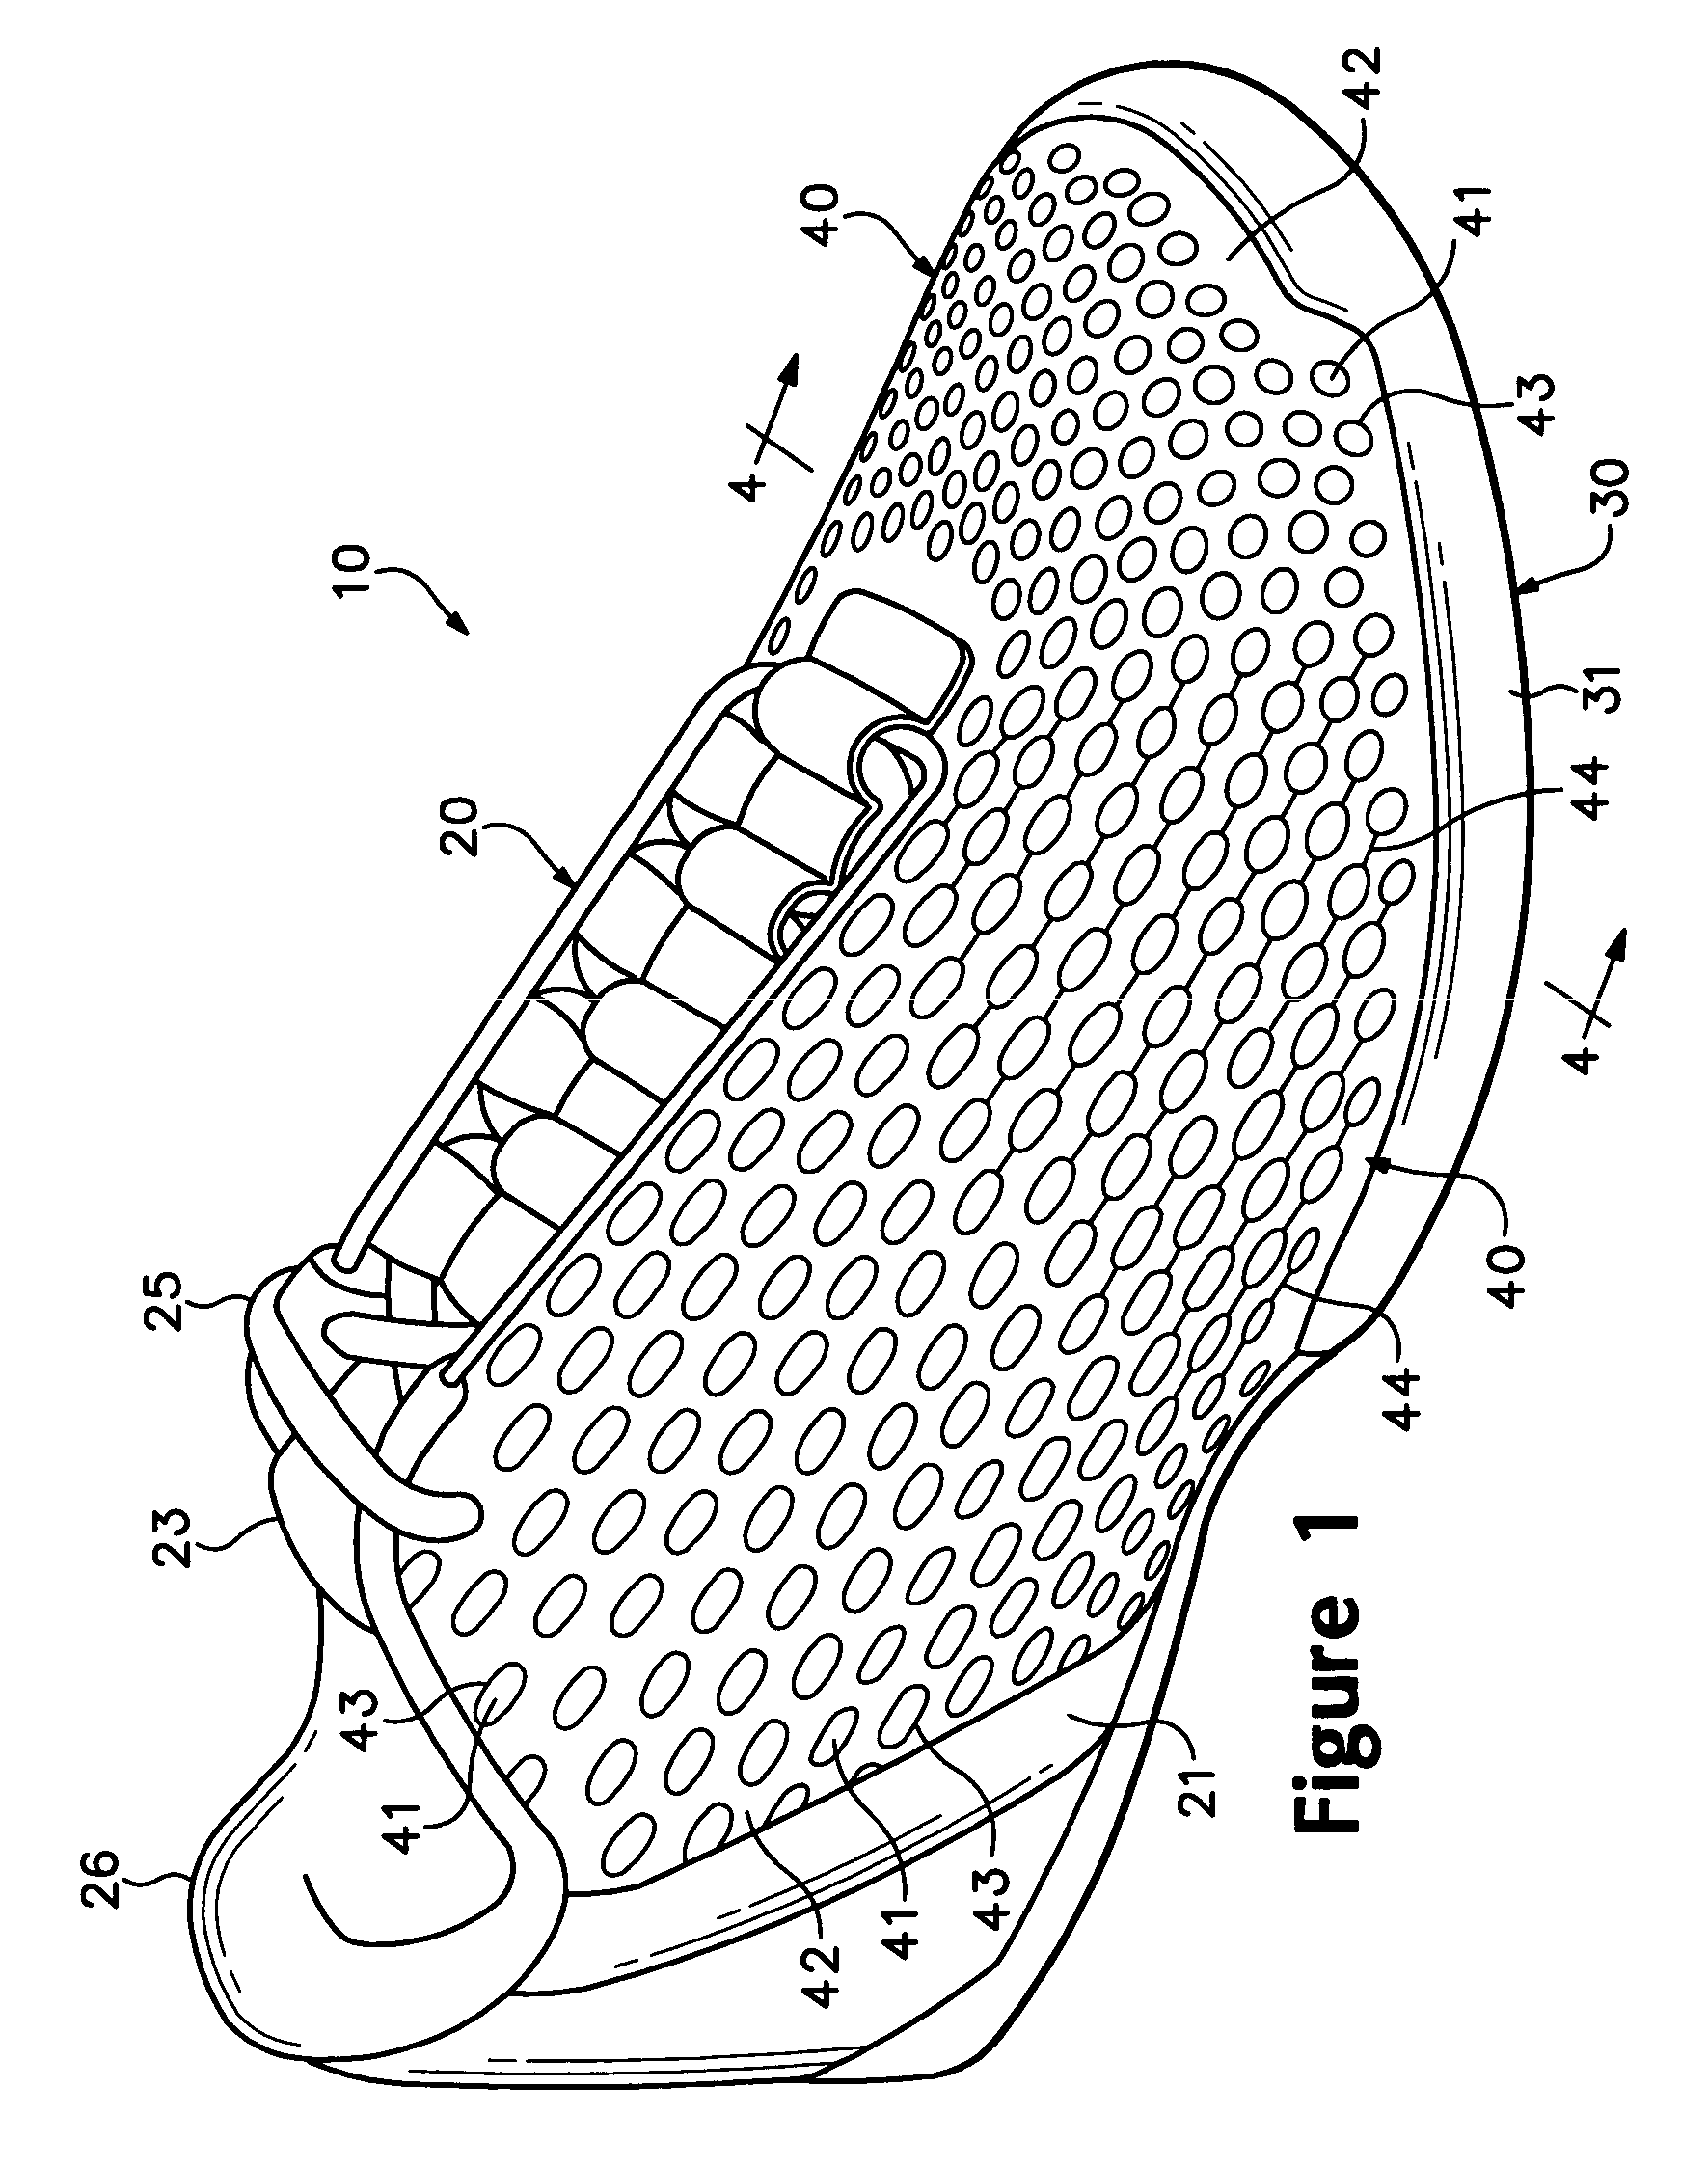 Article of footwear having an upper with a polymer layer